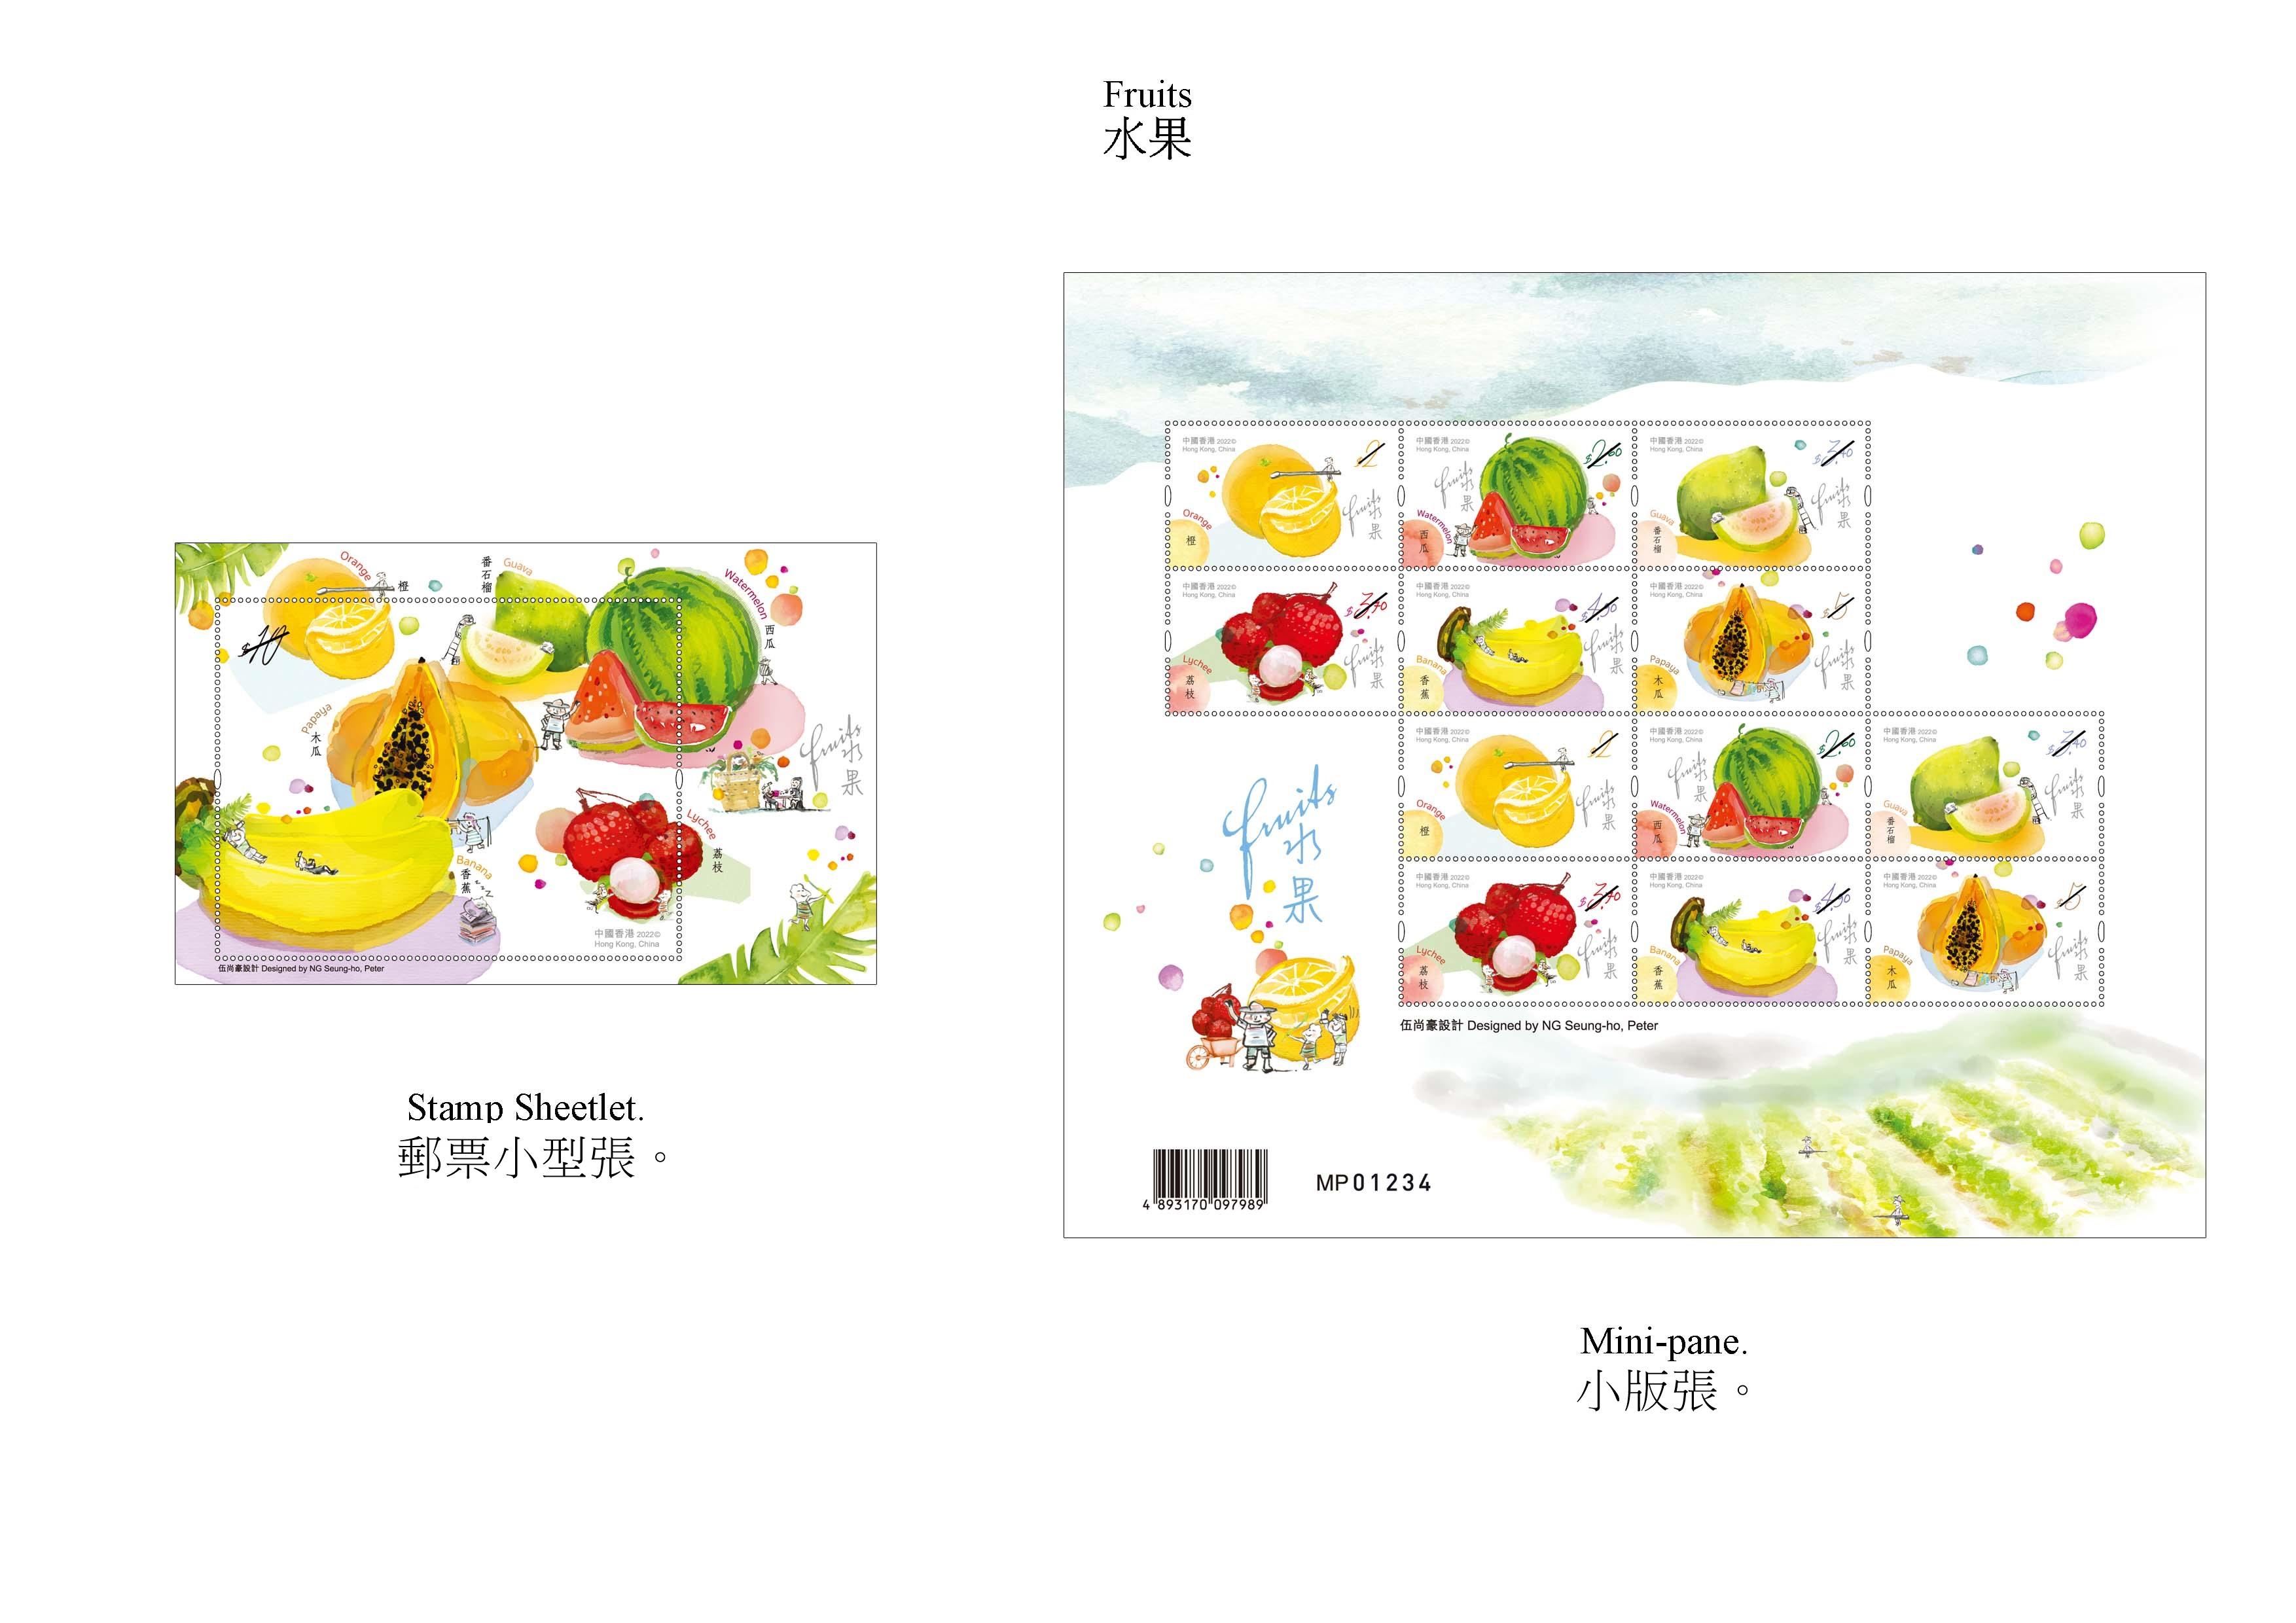 Hongkong Post will launch a special stamp issue and associated philatelic products on the theme of "Fruits" on August 18 (Thursday). Photo shows the stamp sheetlet and the mini-pane.
